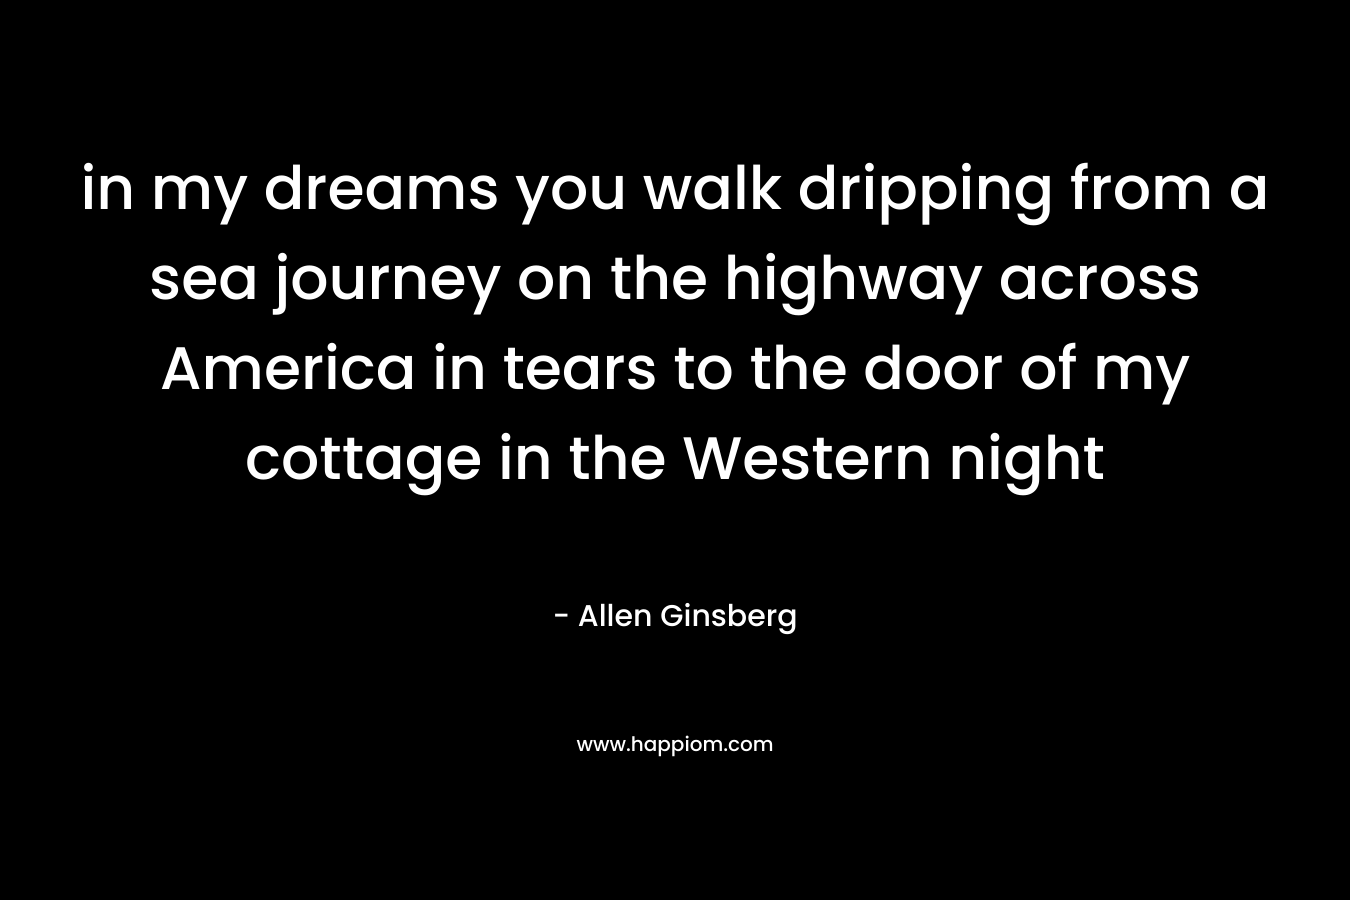 in my dreams you walk dripping from a sea journey on the highway across America in tears to the door of my cottage in the Western night